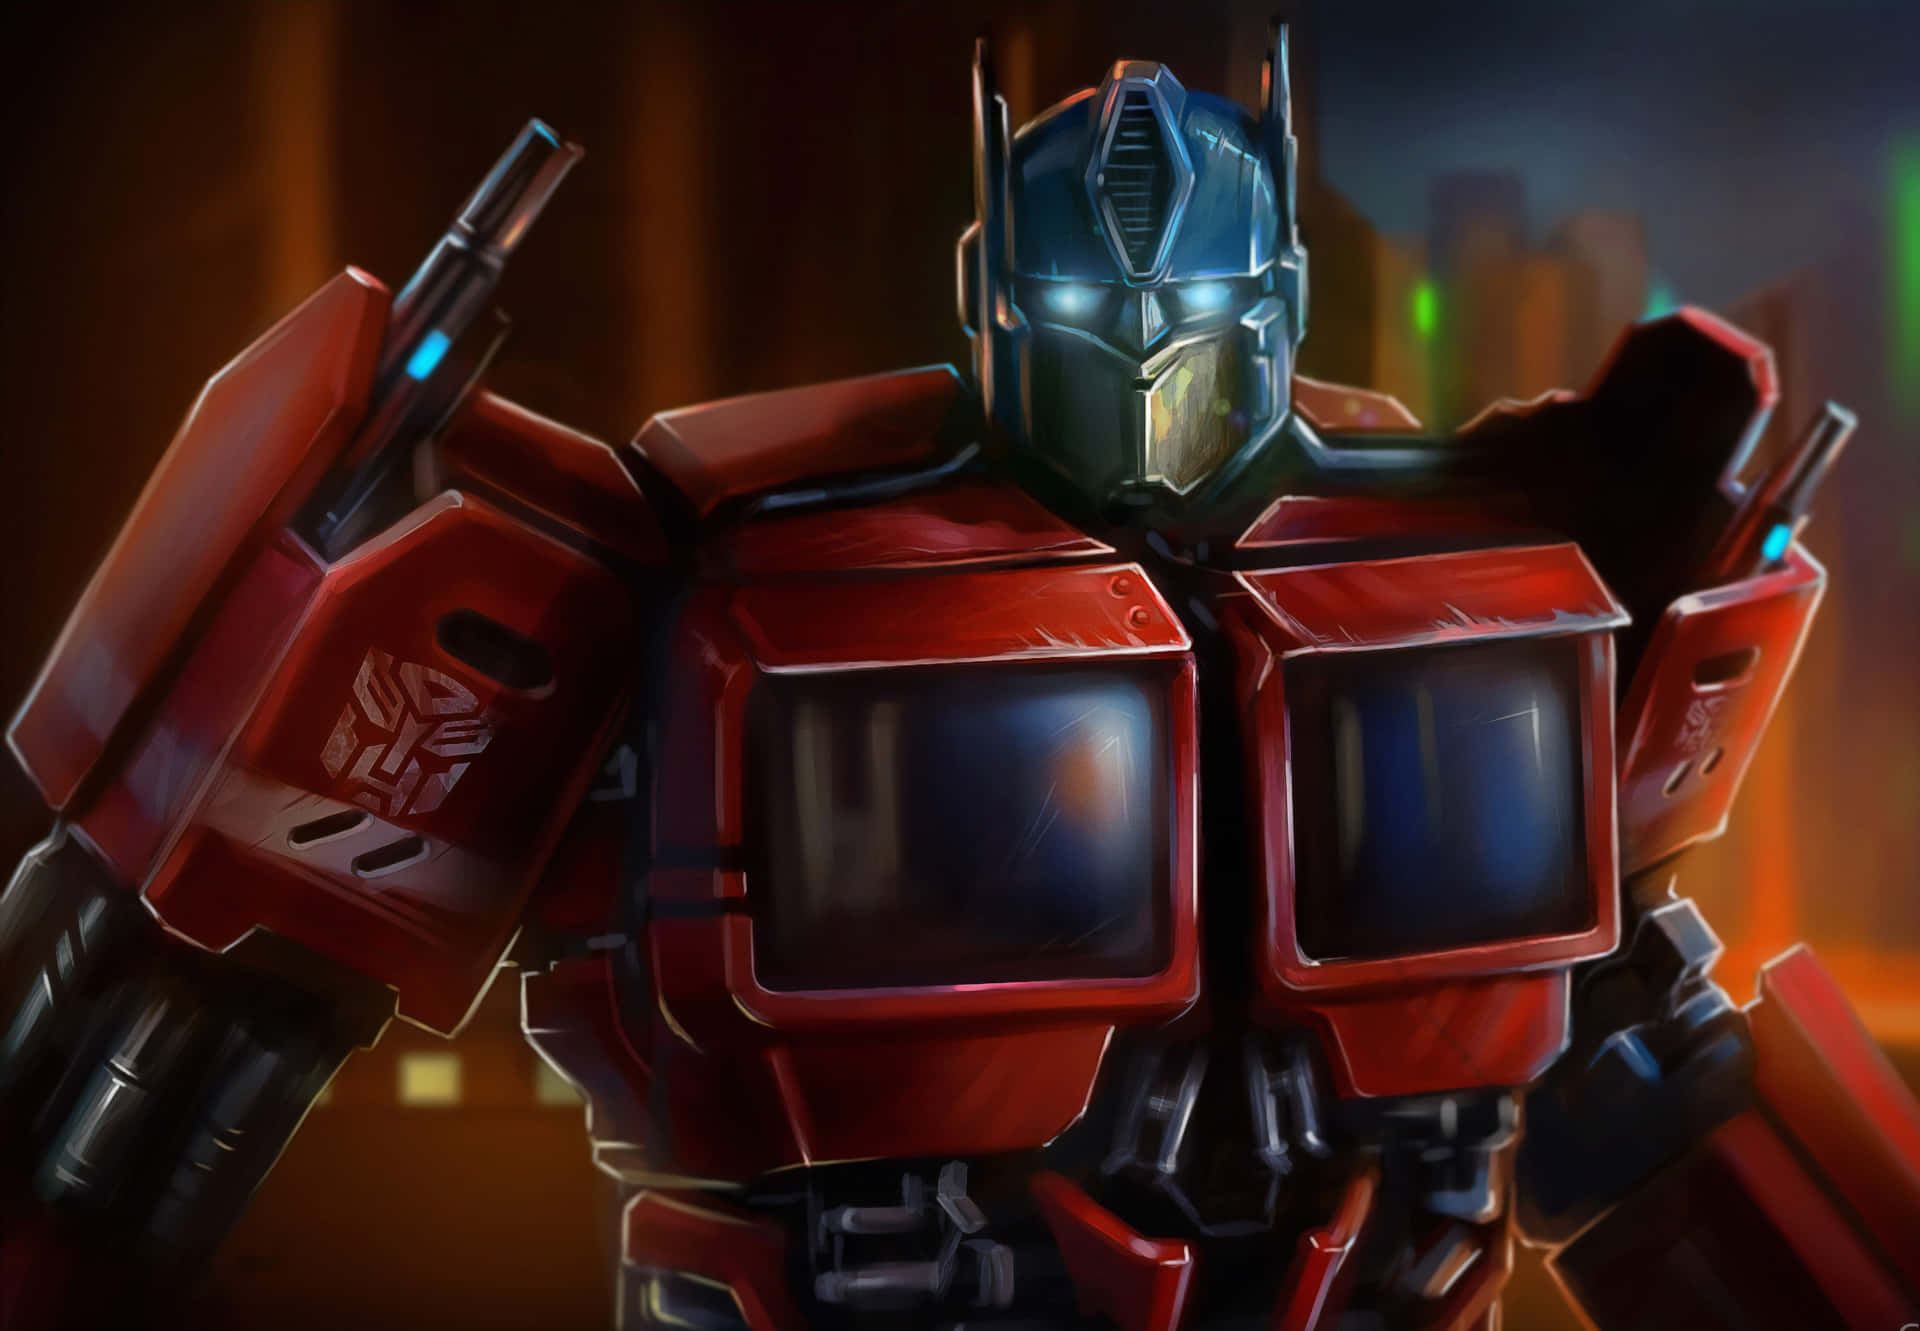 Gear up and get ready to have interstellar adventures with Optimus Prime! Wallpaper